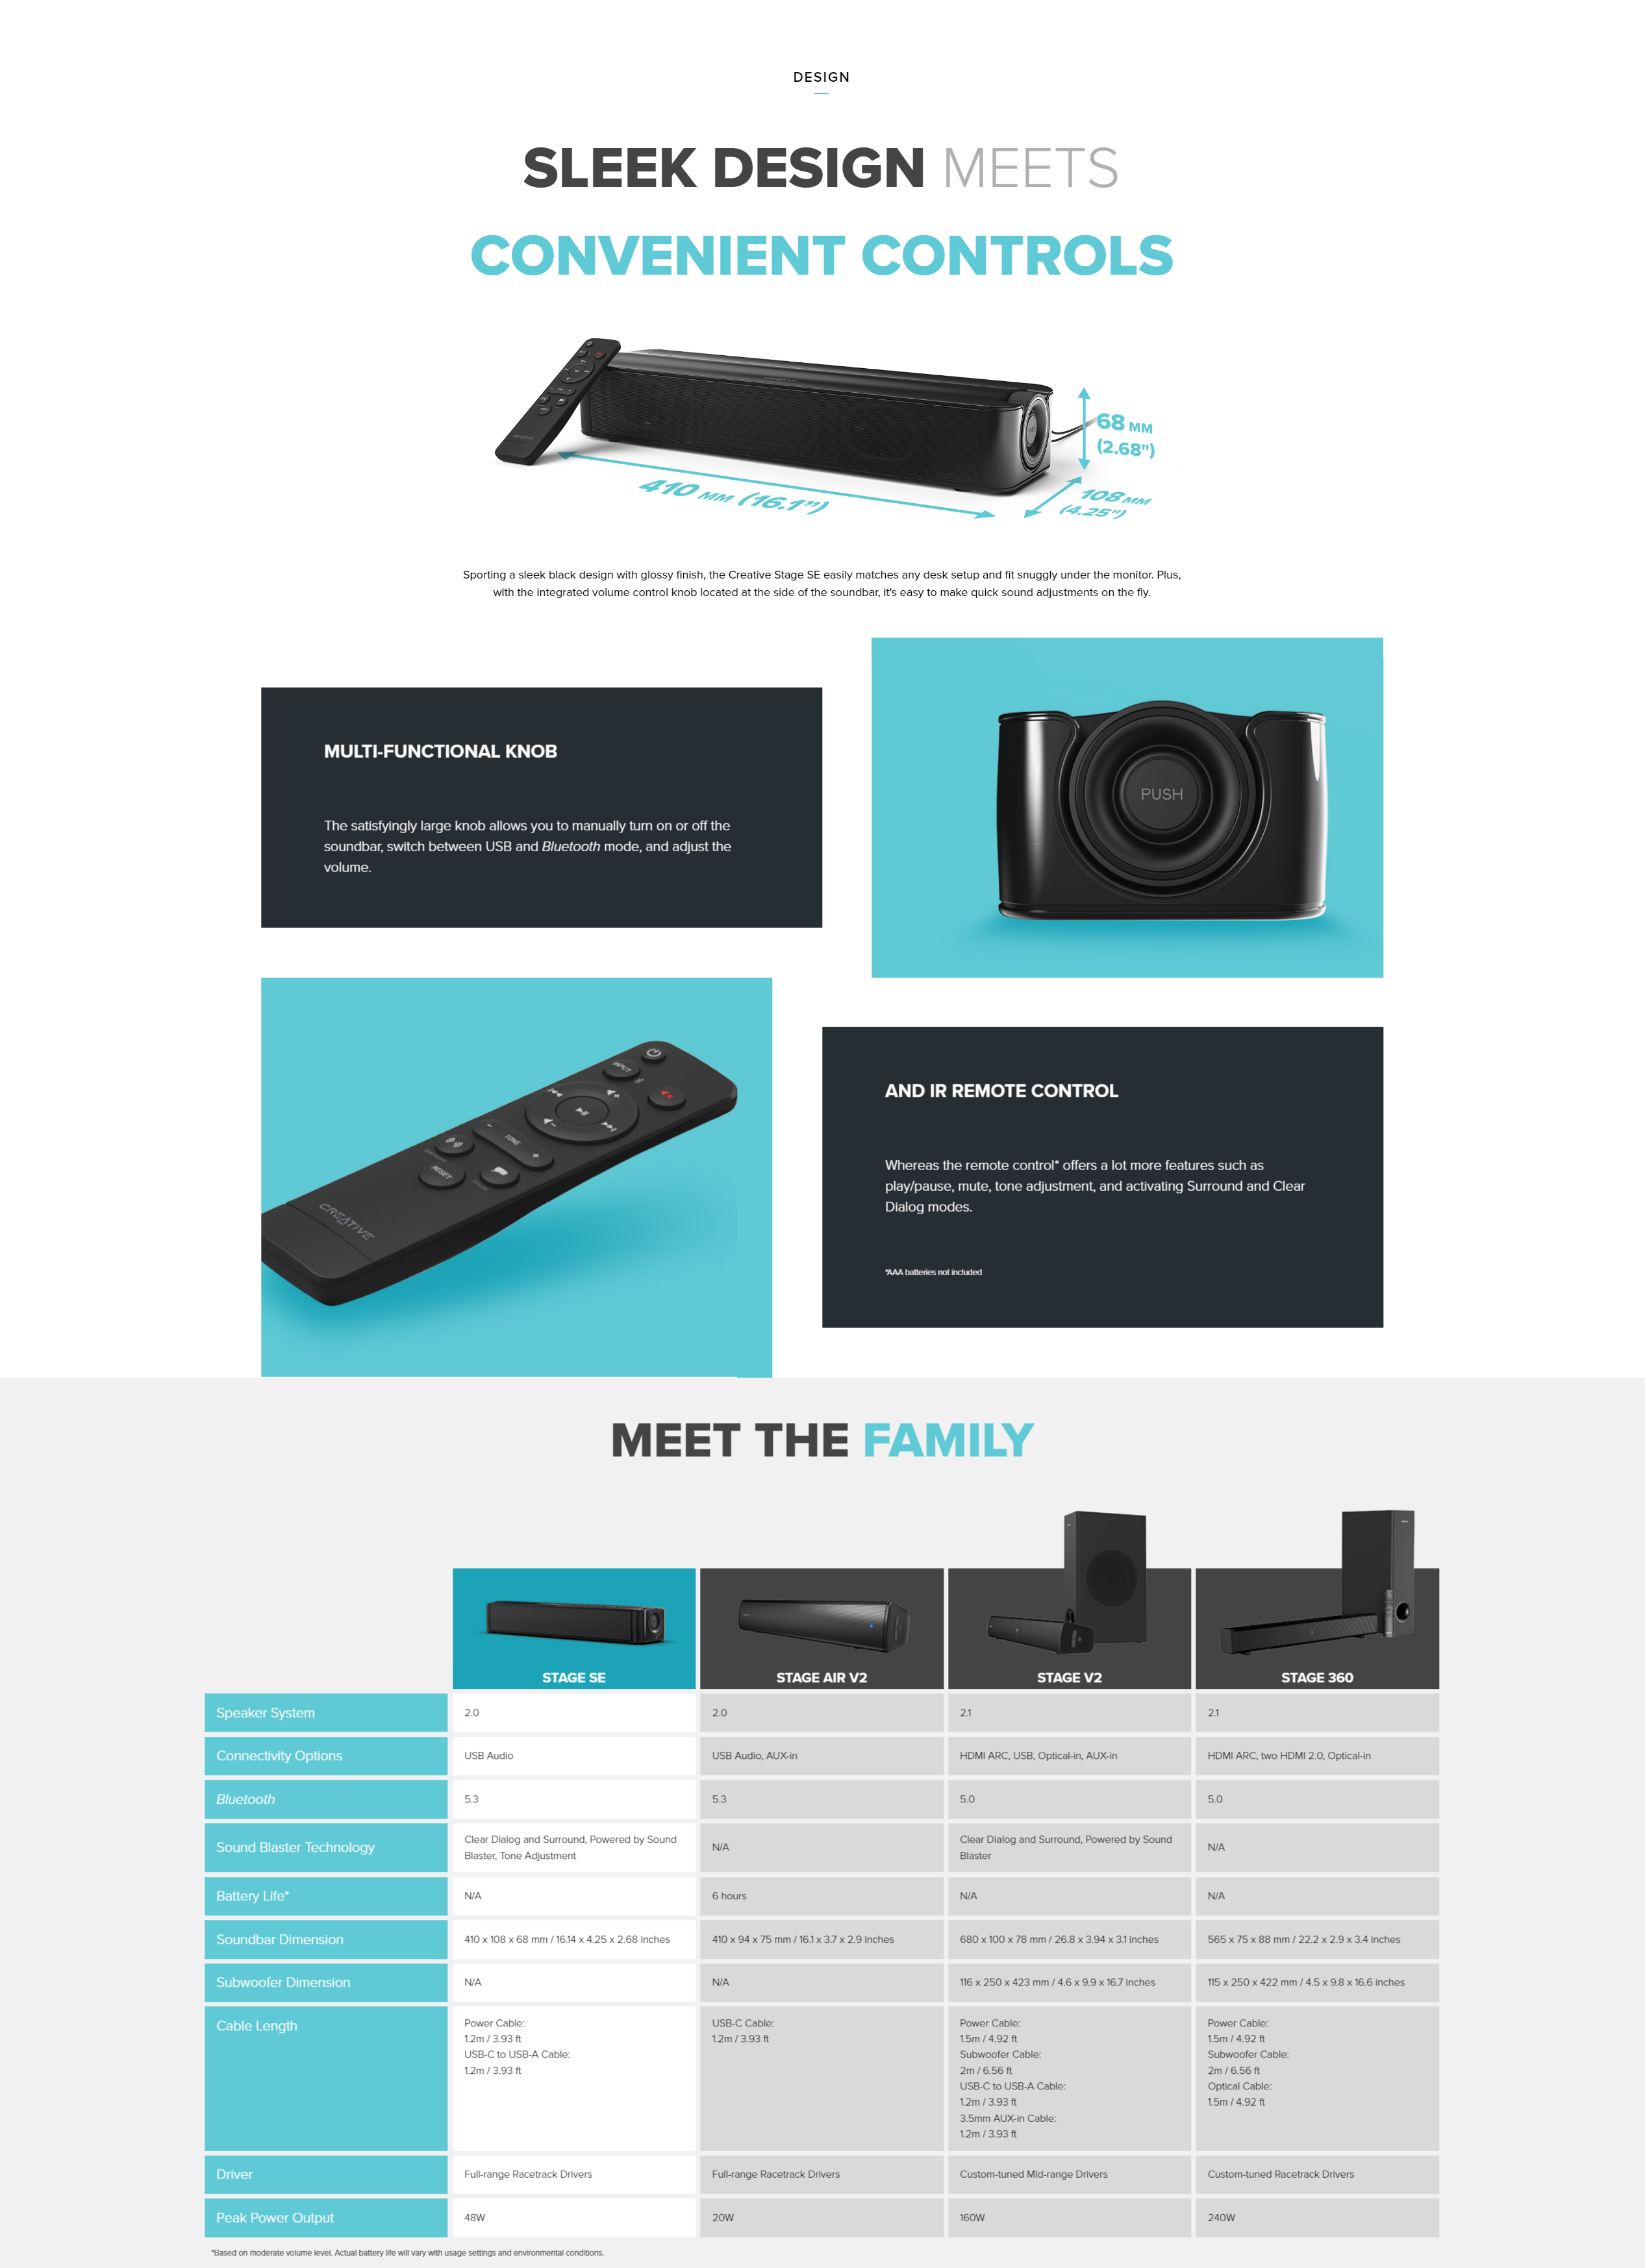 A large marketing image providing additional information about the product Creative Stage SE Bluetooth Soundbar - Additional alt info not provided